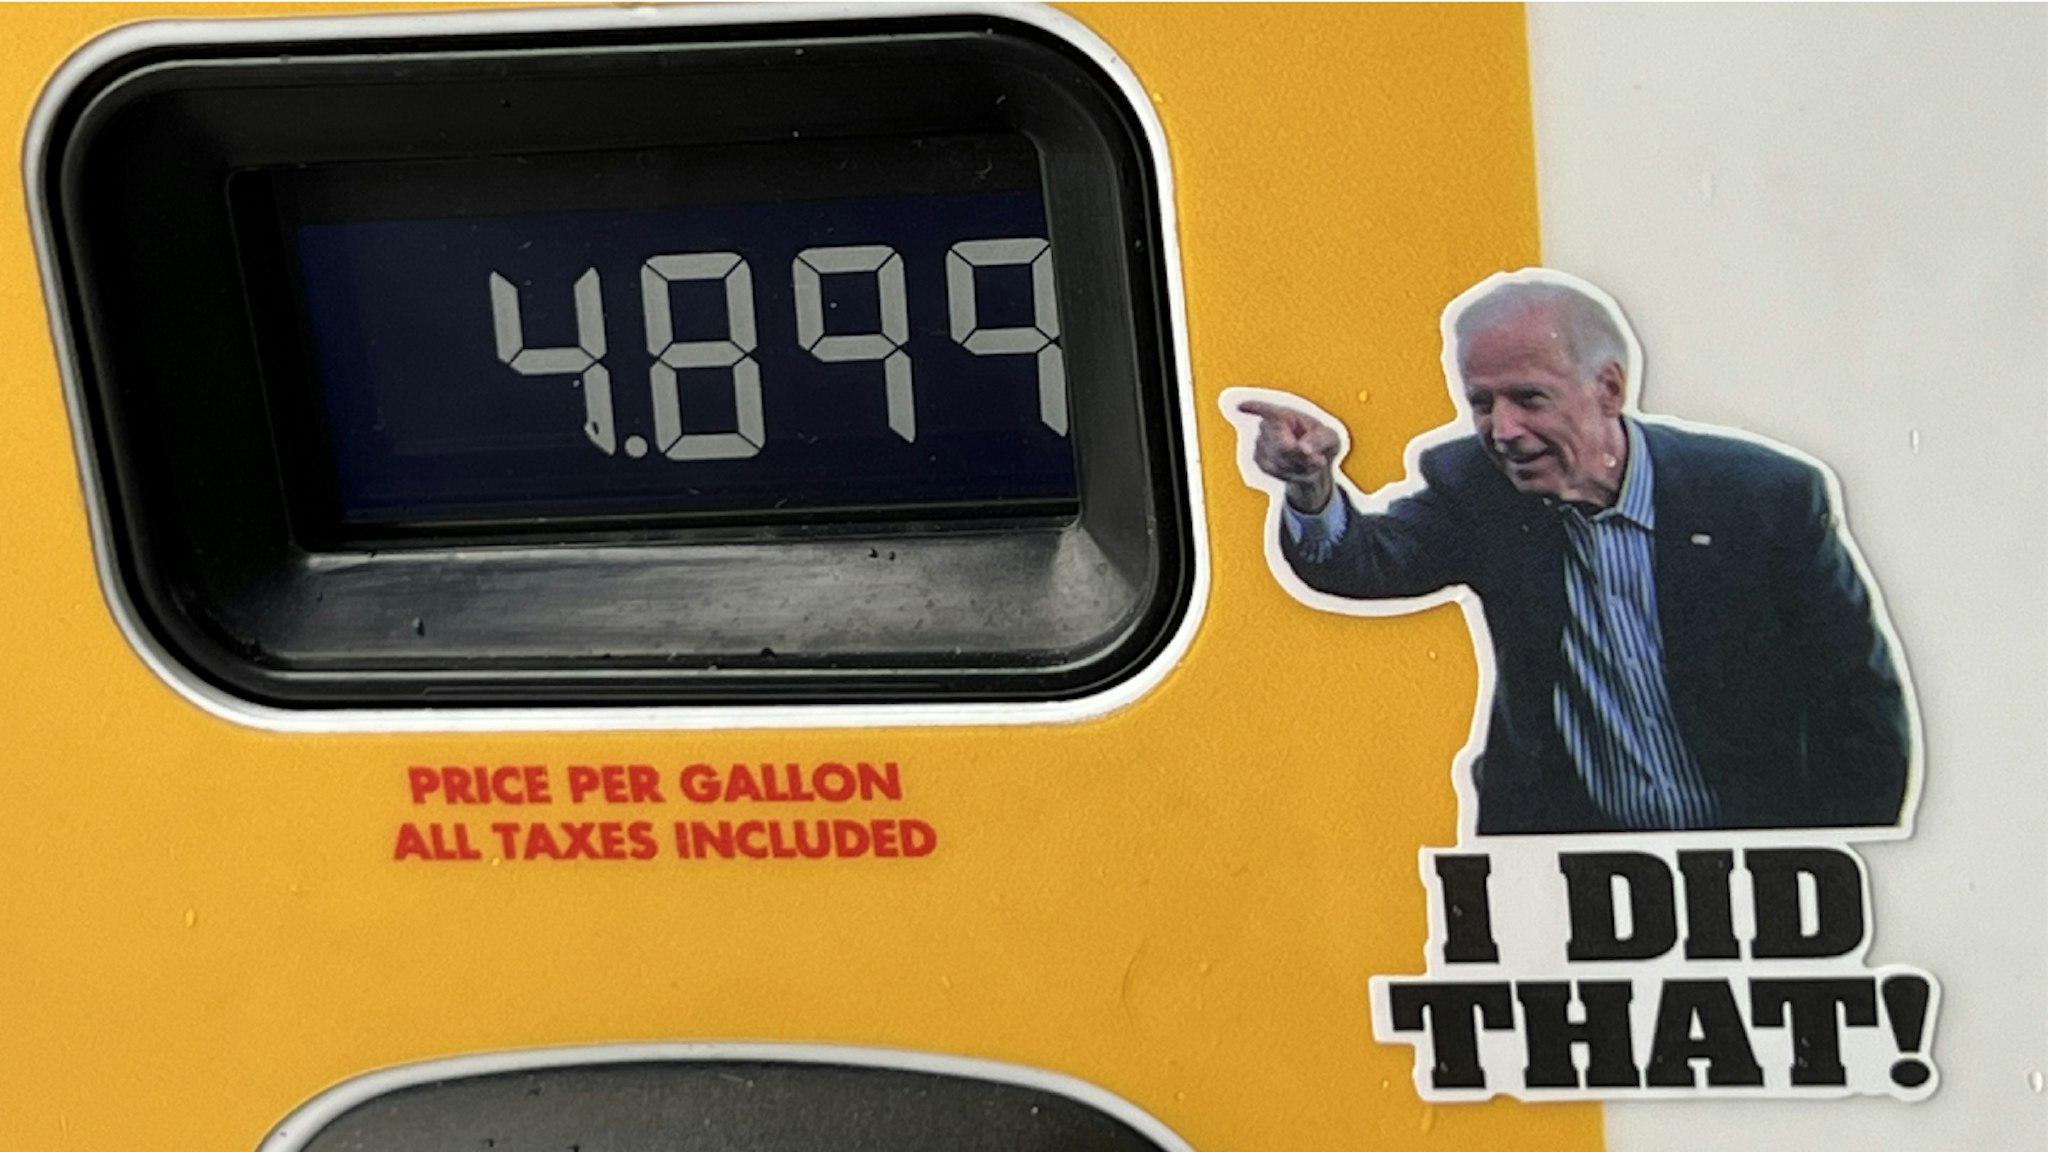 A satirical protest sticker critical of American President Joe Biden, with text reading I Did That, has been placed on a gasoline pump in Lafayette, California, likely to imply responsibility for high gasoline prices, December 29, 2021.